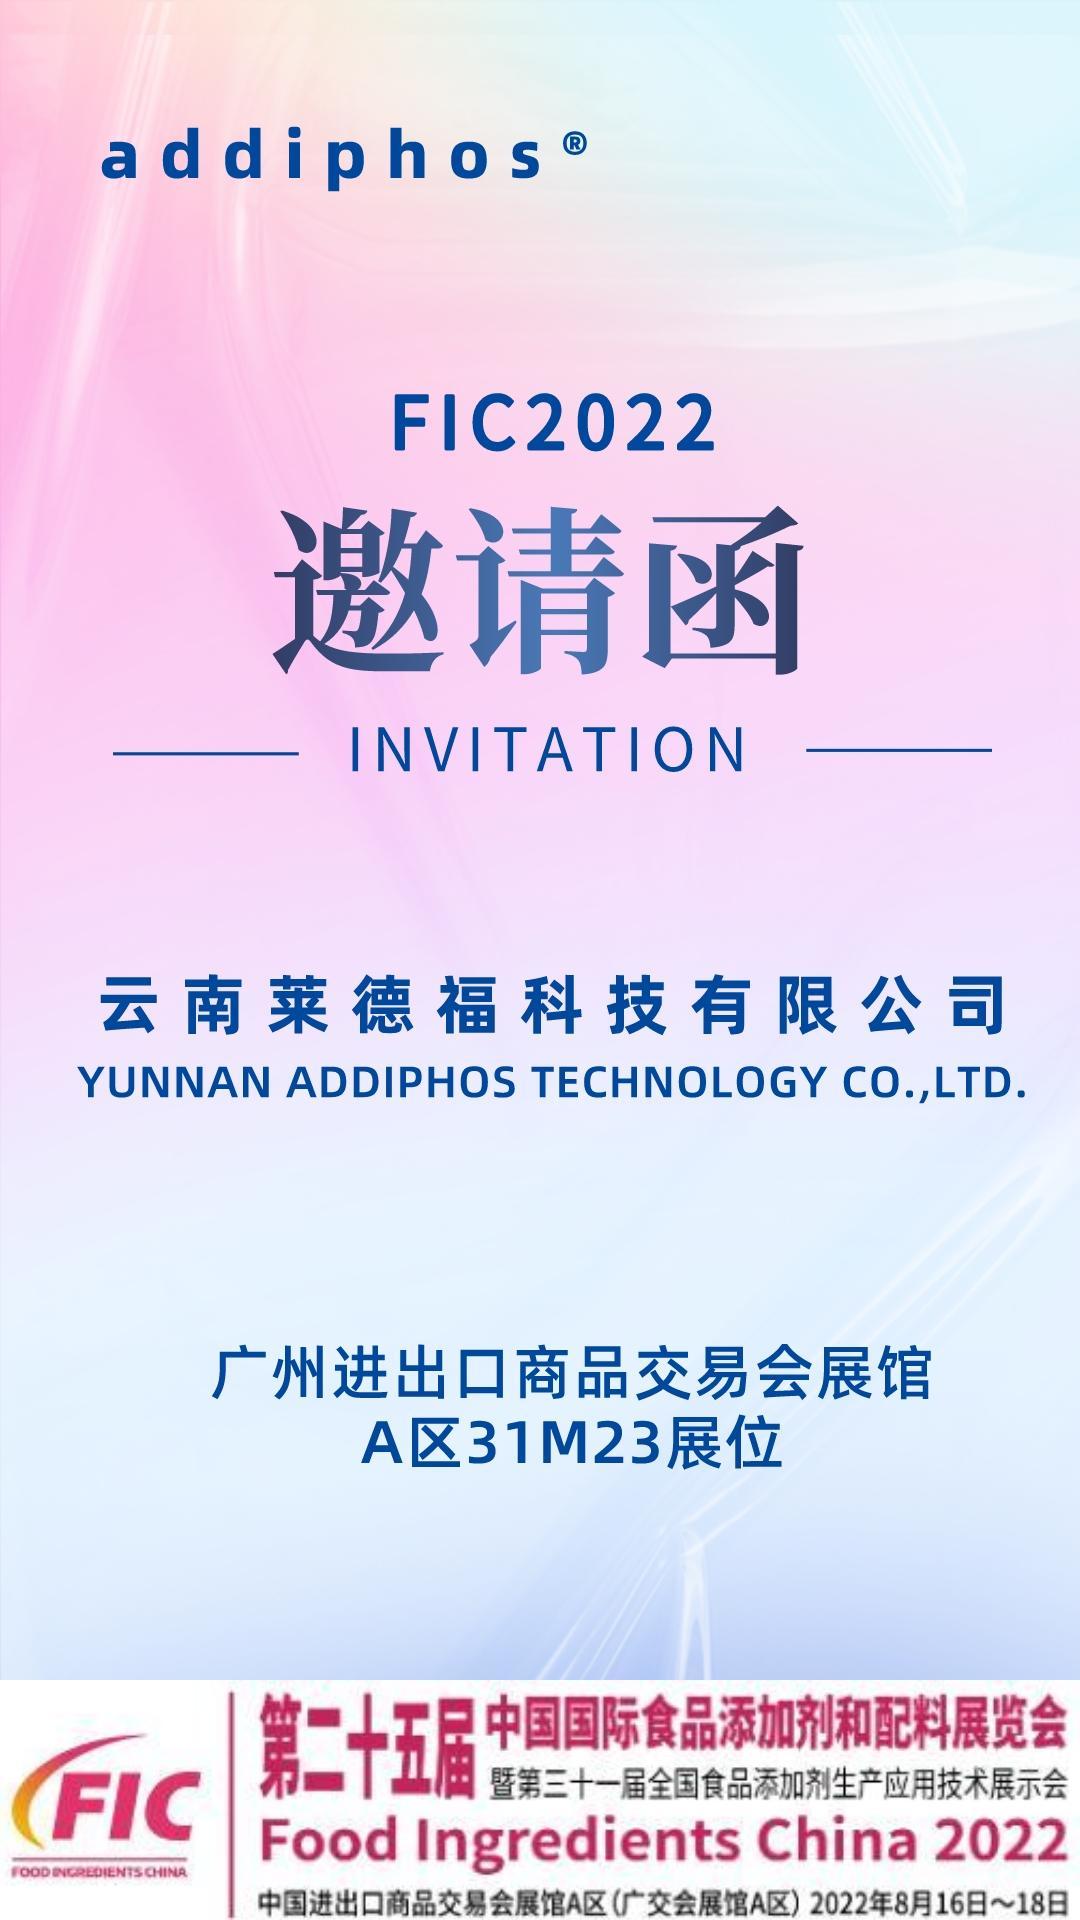 Yunnan Ledford Technology Co., Ltd. invites you to attend 2022 Guangzhou FIC Food Additives and Ingredients Exhibition